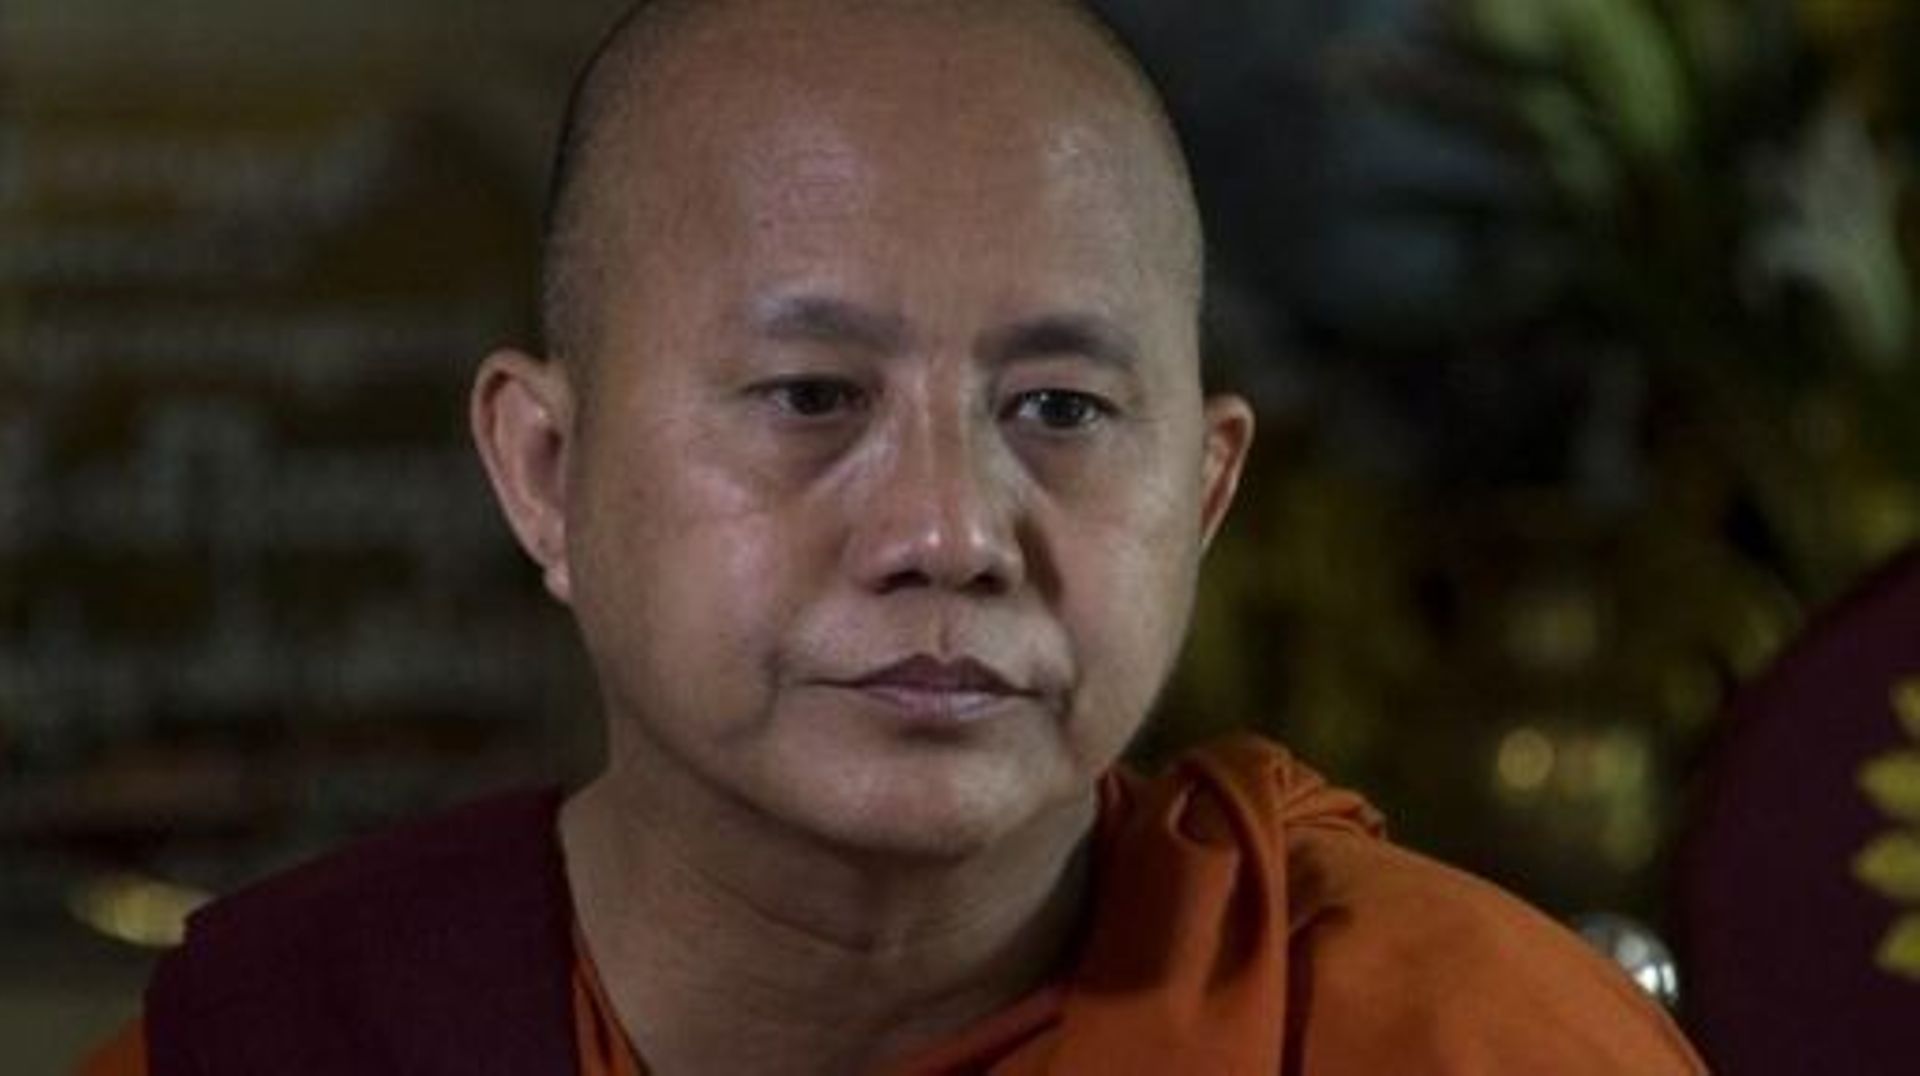 This photo taken on March 10, 2018 shows ultra-nationalist monk Ashin Wirathu meeting with supporters at a monastery in Yangon to give a sermon marking the end of a year-long ban on public speaking. Buddhism may be touted in the west as an inherently peac